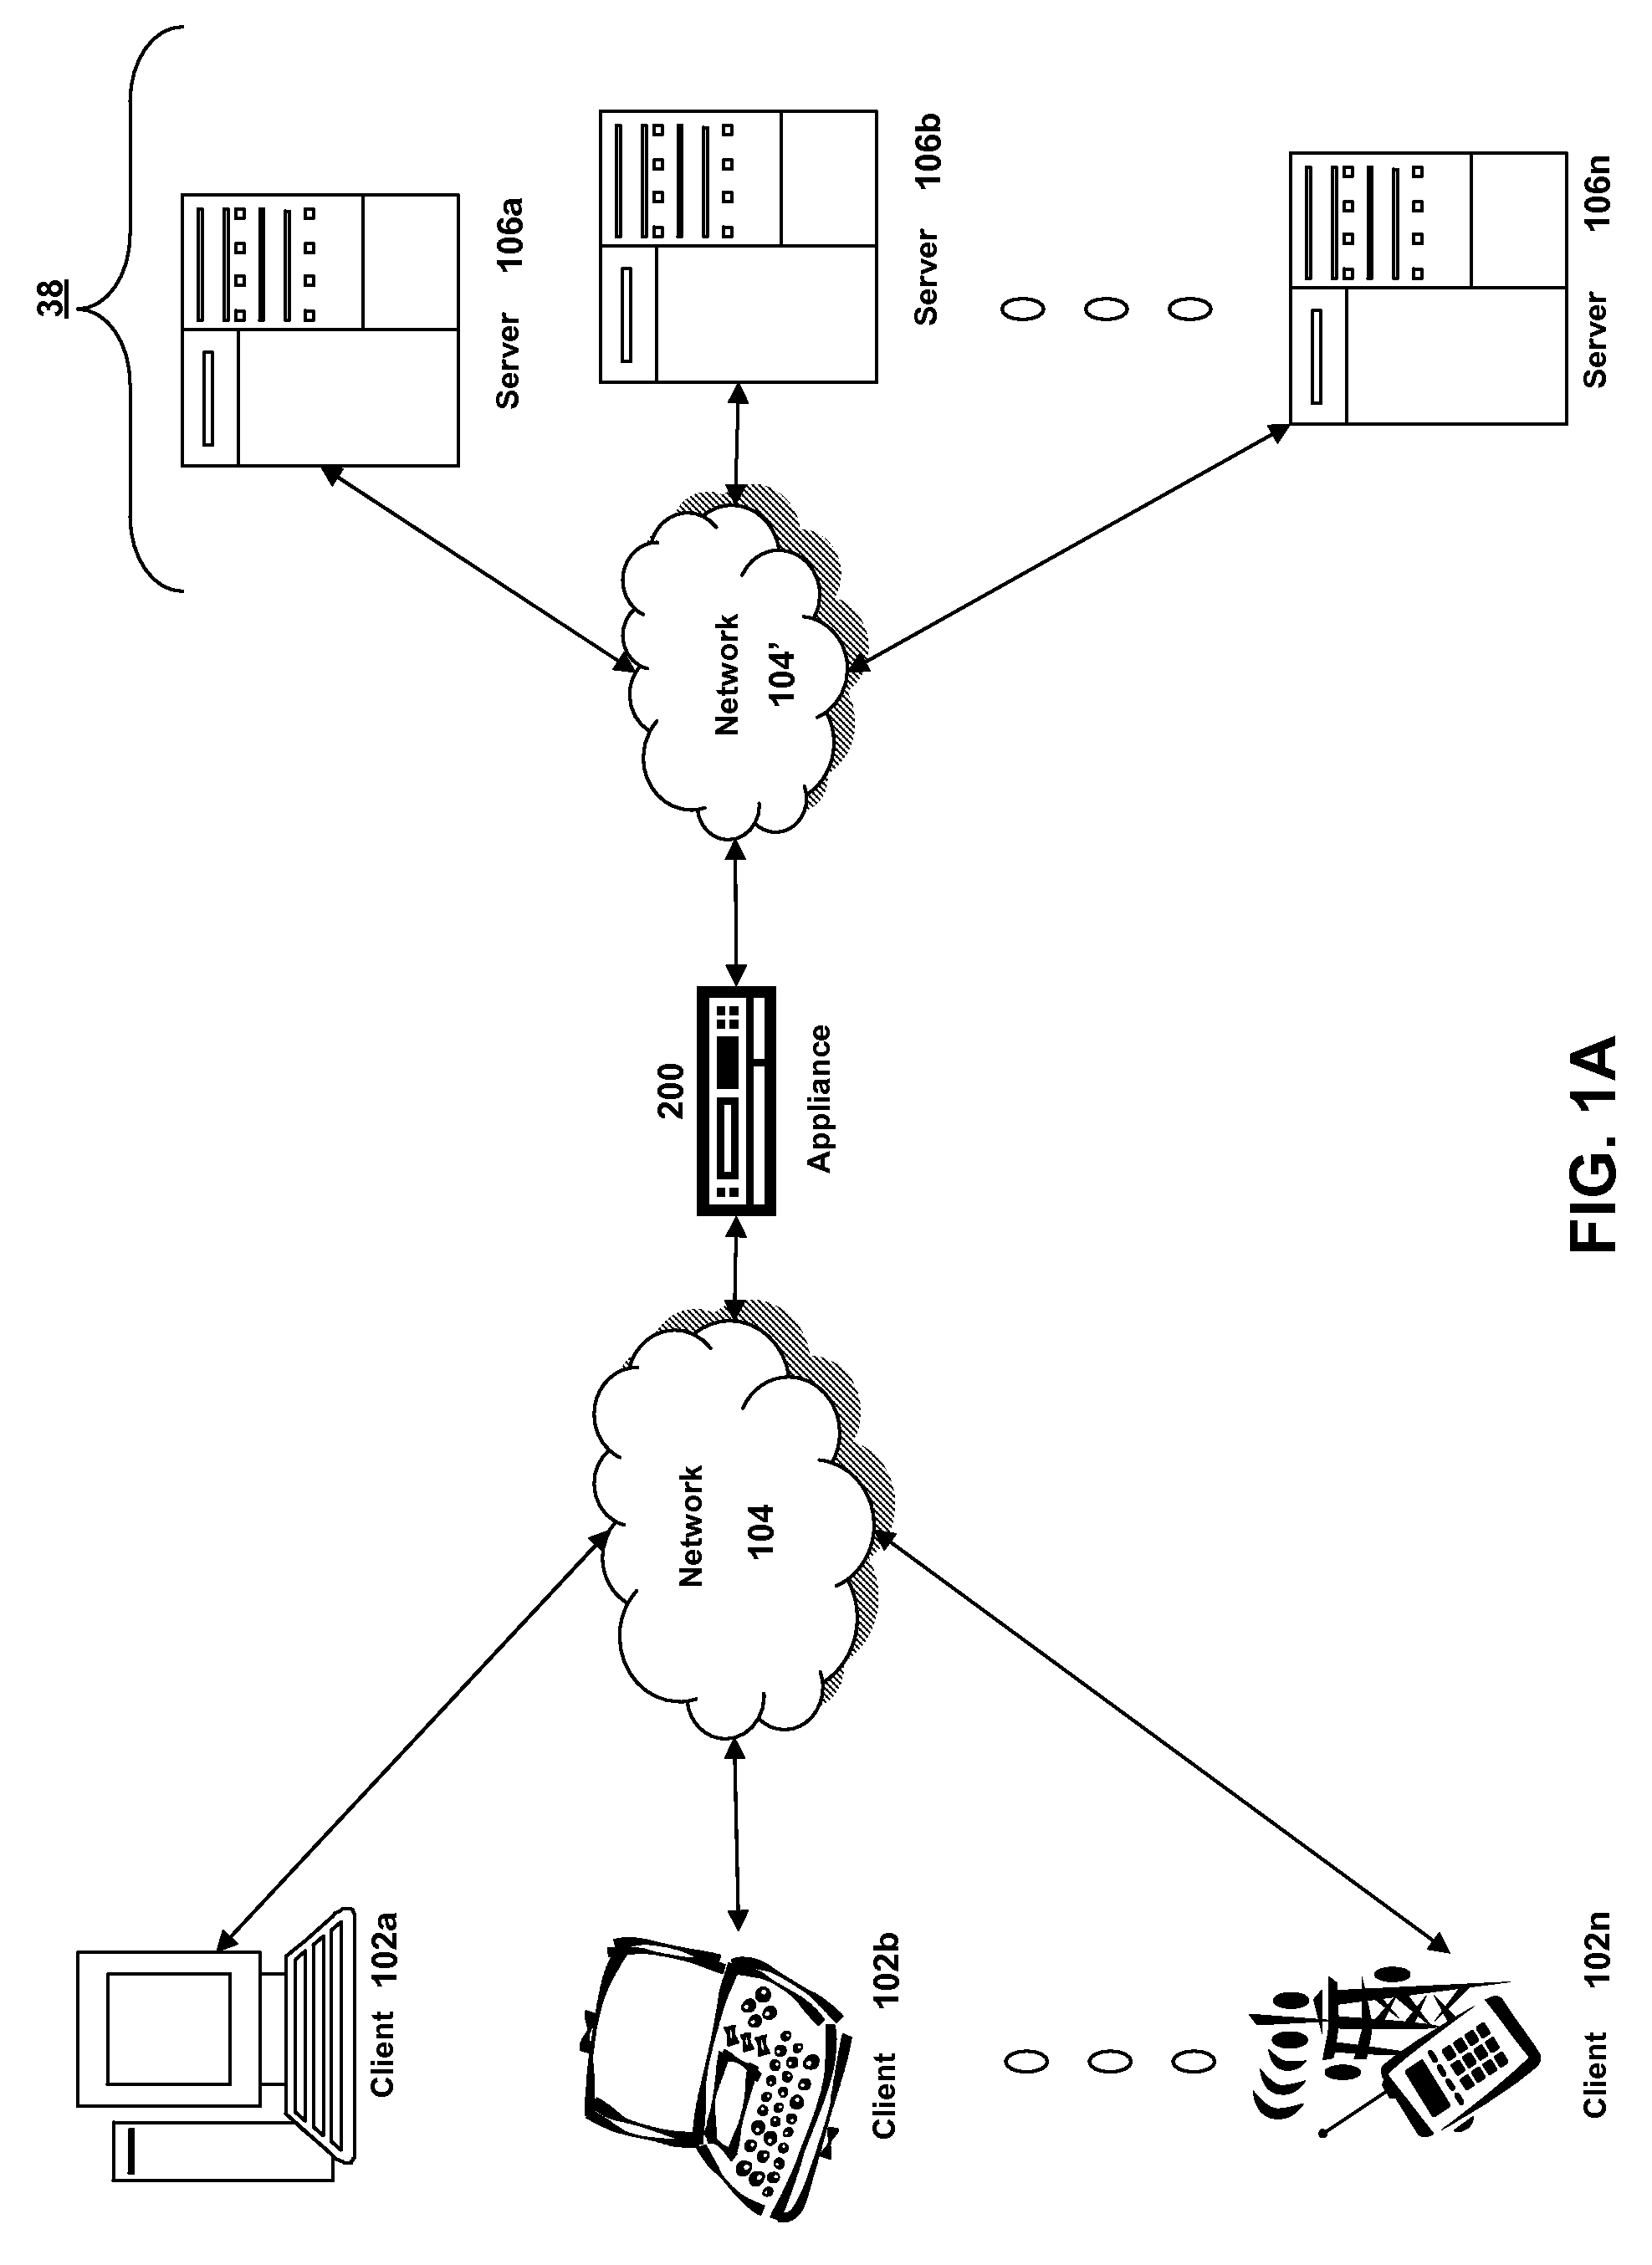 Systems and methods for using object oriented expressions to configure application security policies